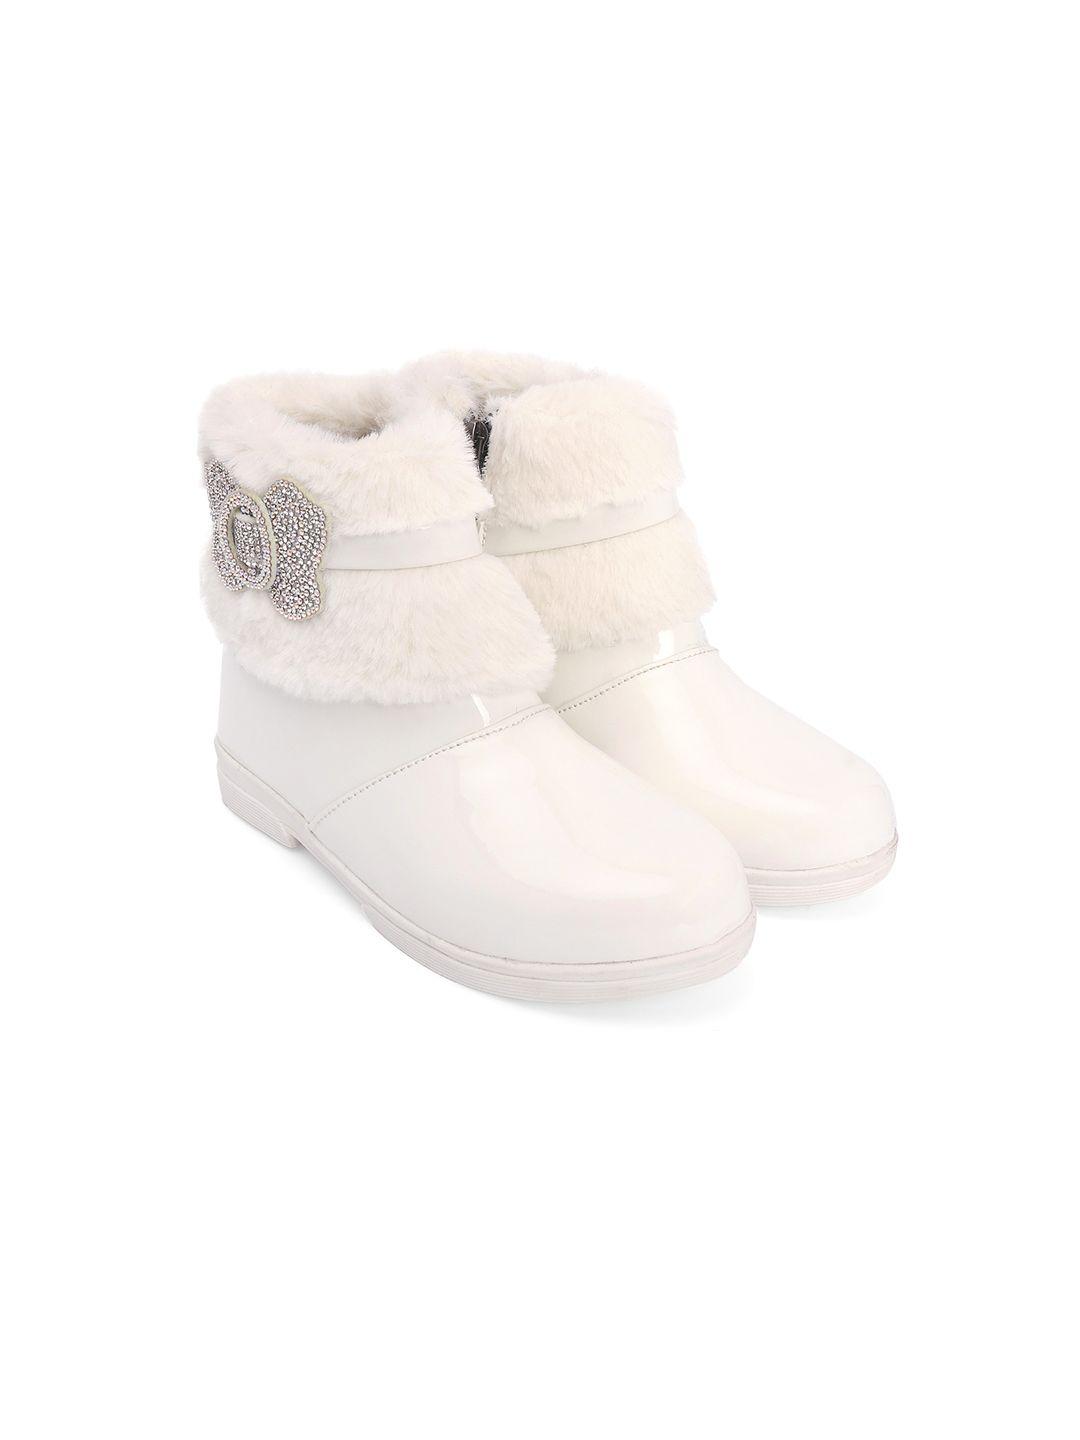 baesd girls bow detailed winter boots